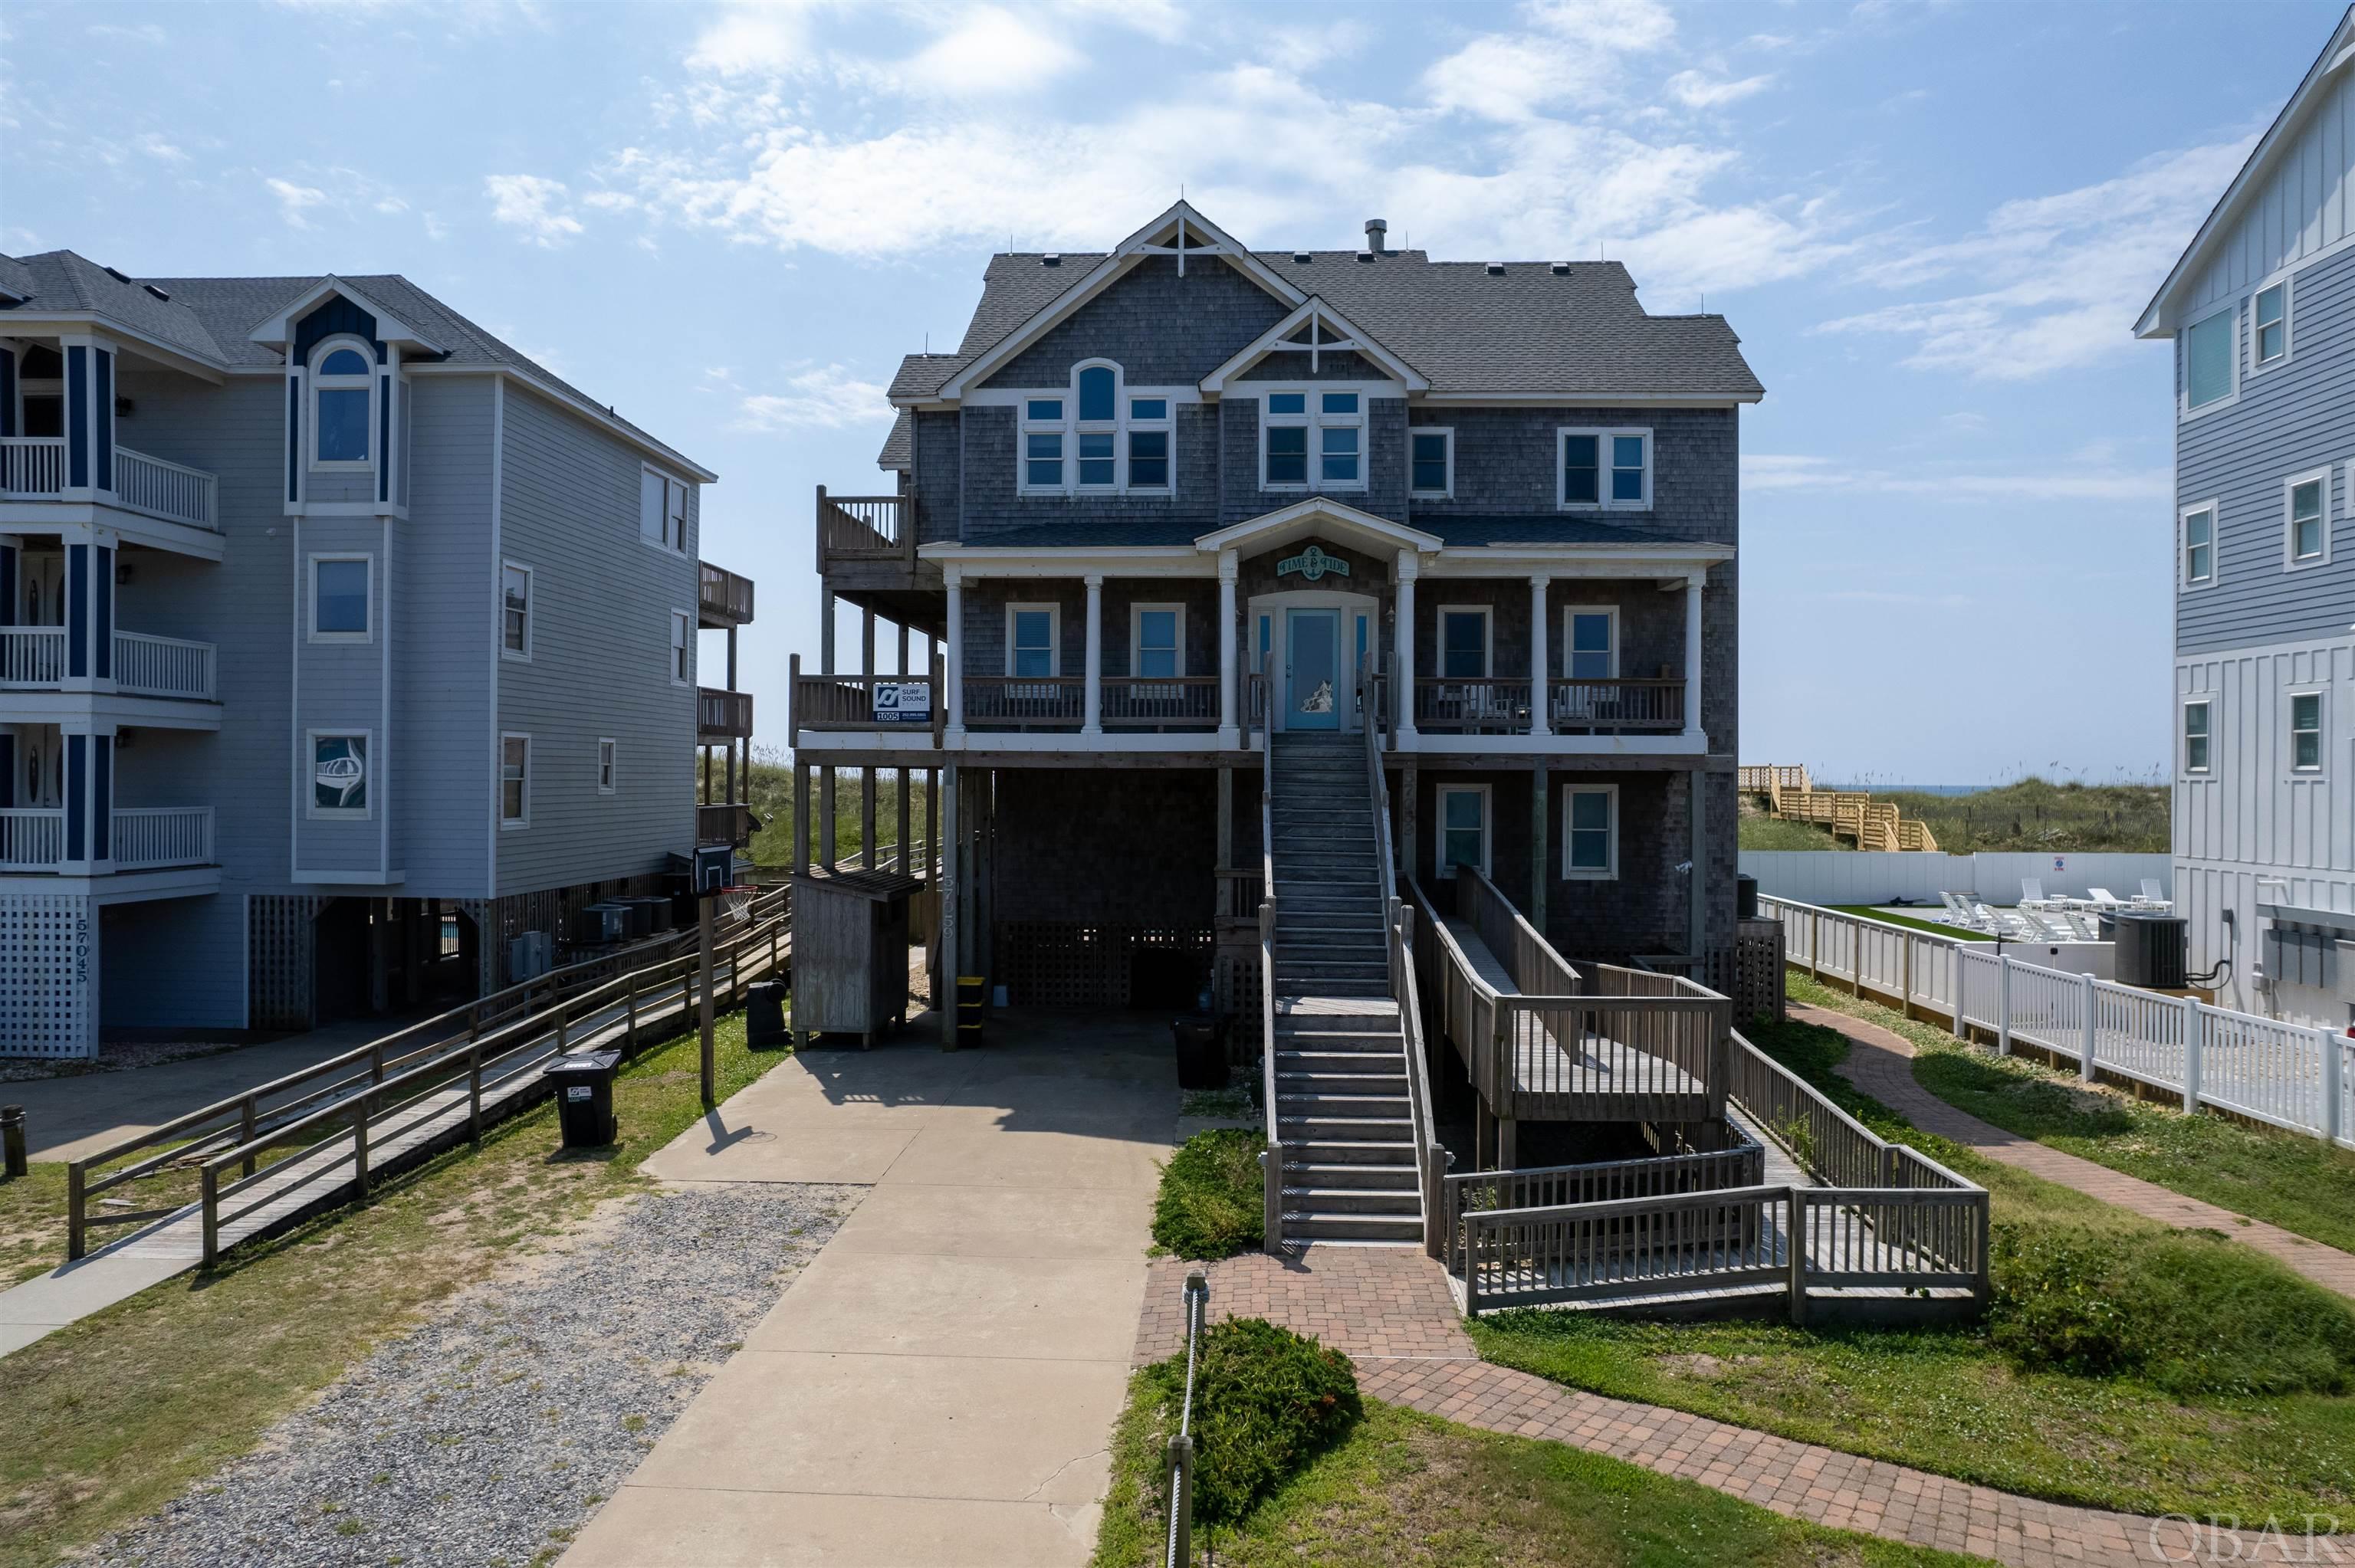 HATTERAS VILLAGE, QUINTESSENTIAL OUTER BANKS. Make your beach dream come true with this beautiful oceanfront home, appropriately named TIME AND TIDE. Whether a personal family vacation retreat, or an investment property with excellent rental income, this gorgeous home will satisfy your search. Floor-to-ceiling windows give a 180 degree ocean view. Vaulted ceilings and hardwood floors open the space for group gatherings. 6 bedrooms are en-suite (2 with jetted tub), with a 7th room being used for another bedroom. The upper level great room features a chef's dream kitchen, wood-burning fireplace, elevator, reading nook...and those BREATHTAKING VIEWS. Additional features are a handicap ramp with one designated handicap bedroom, dry entry, large decks on every level, hot tub, game room with wet bar and two laundry areas. The private heated pool enjoys a nice wide apron, with pergola seating area. Quality outdoor furniture is plentiful around the pool and on the many decks...all, just steps to the waters edge. Make TIME AND TIDE slow down while you relax and enjoy the sunrise in your beach dream come true.